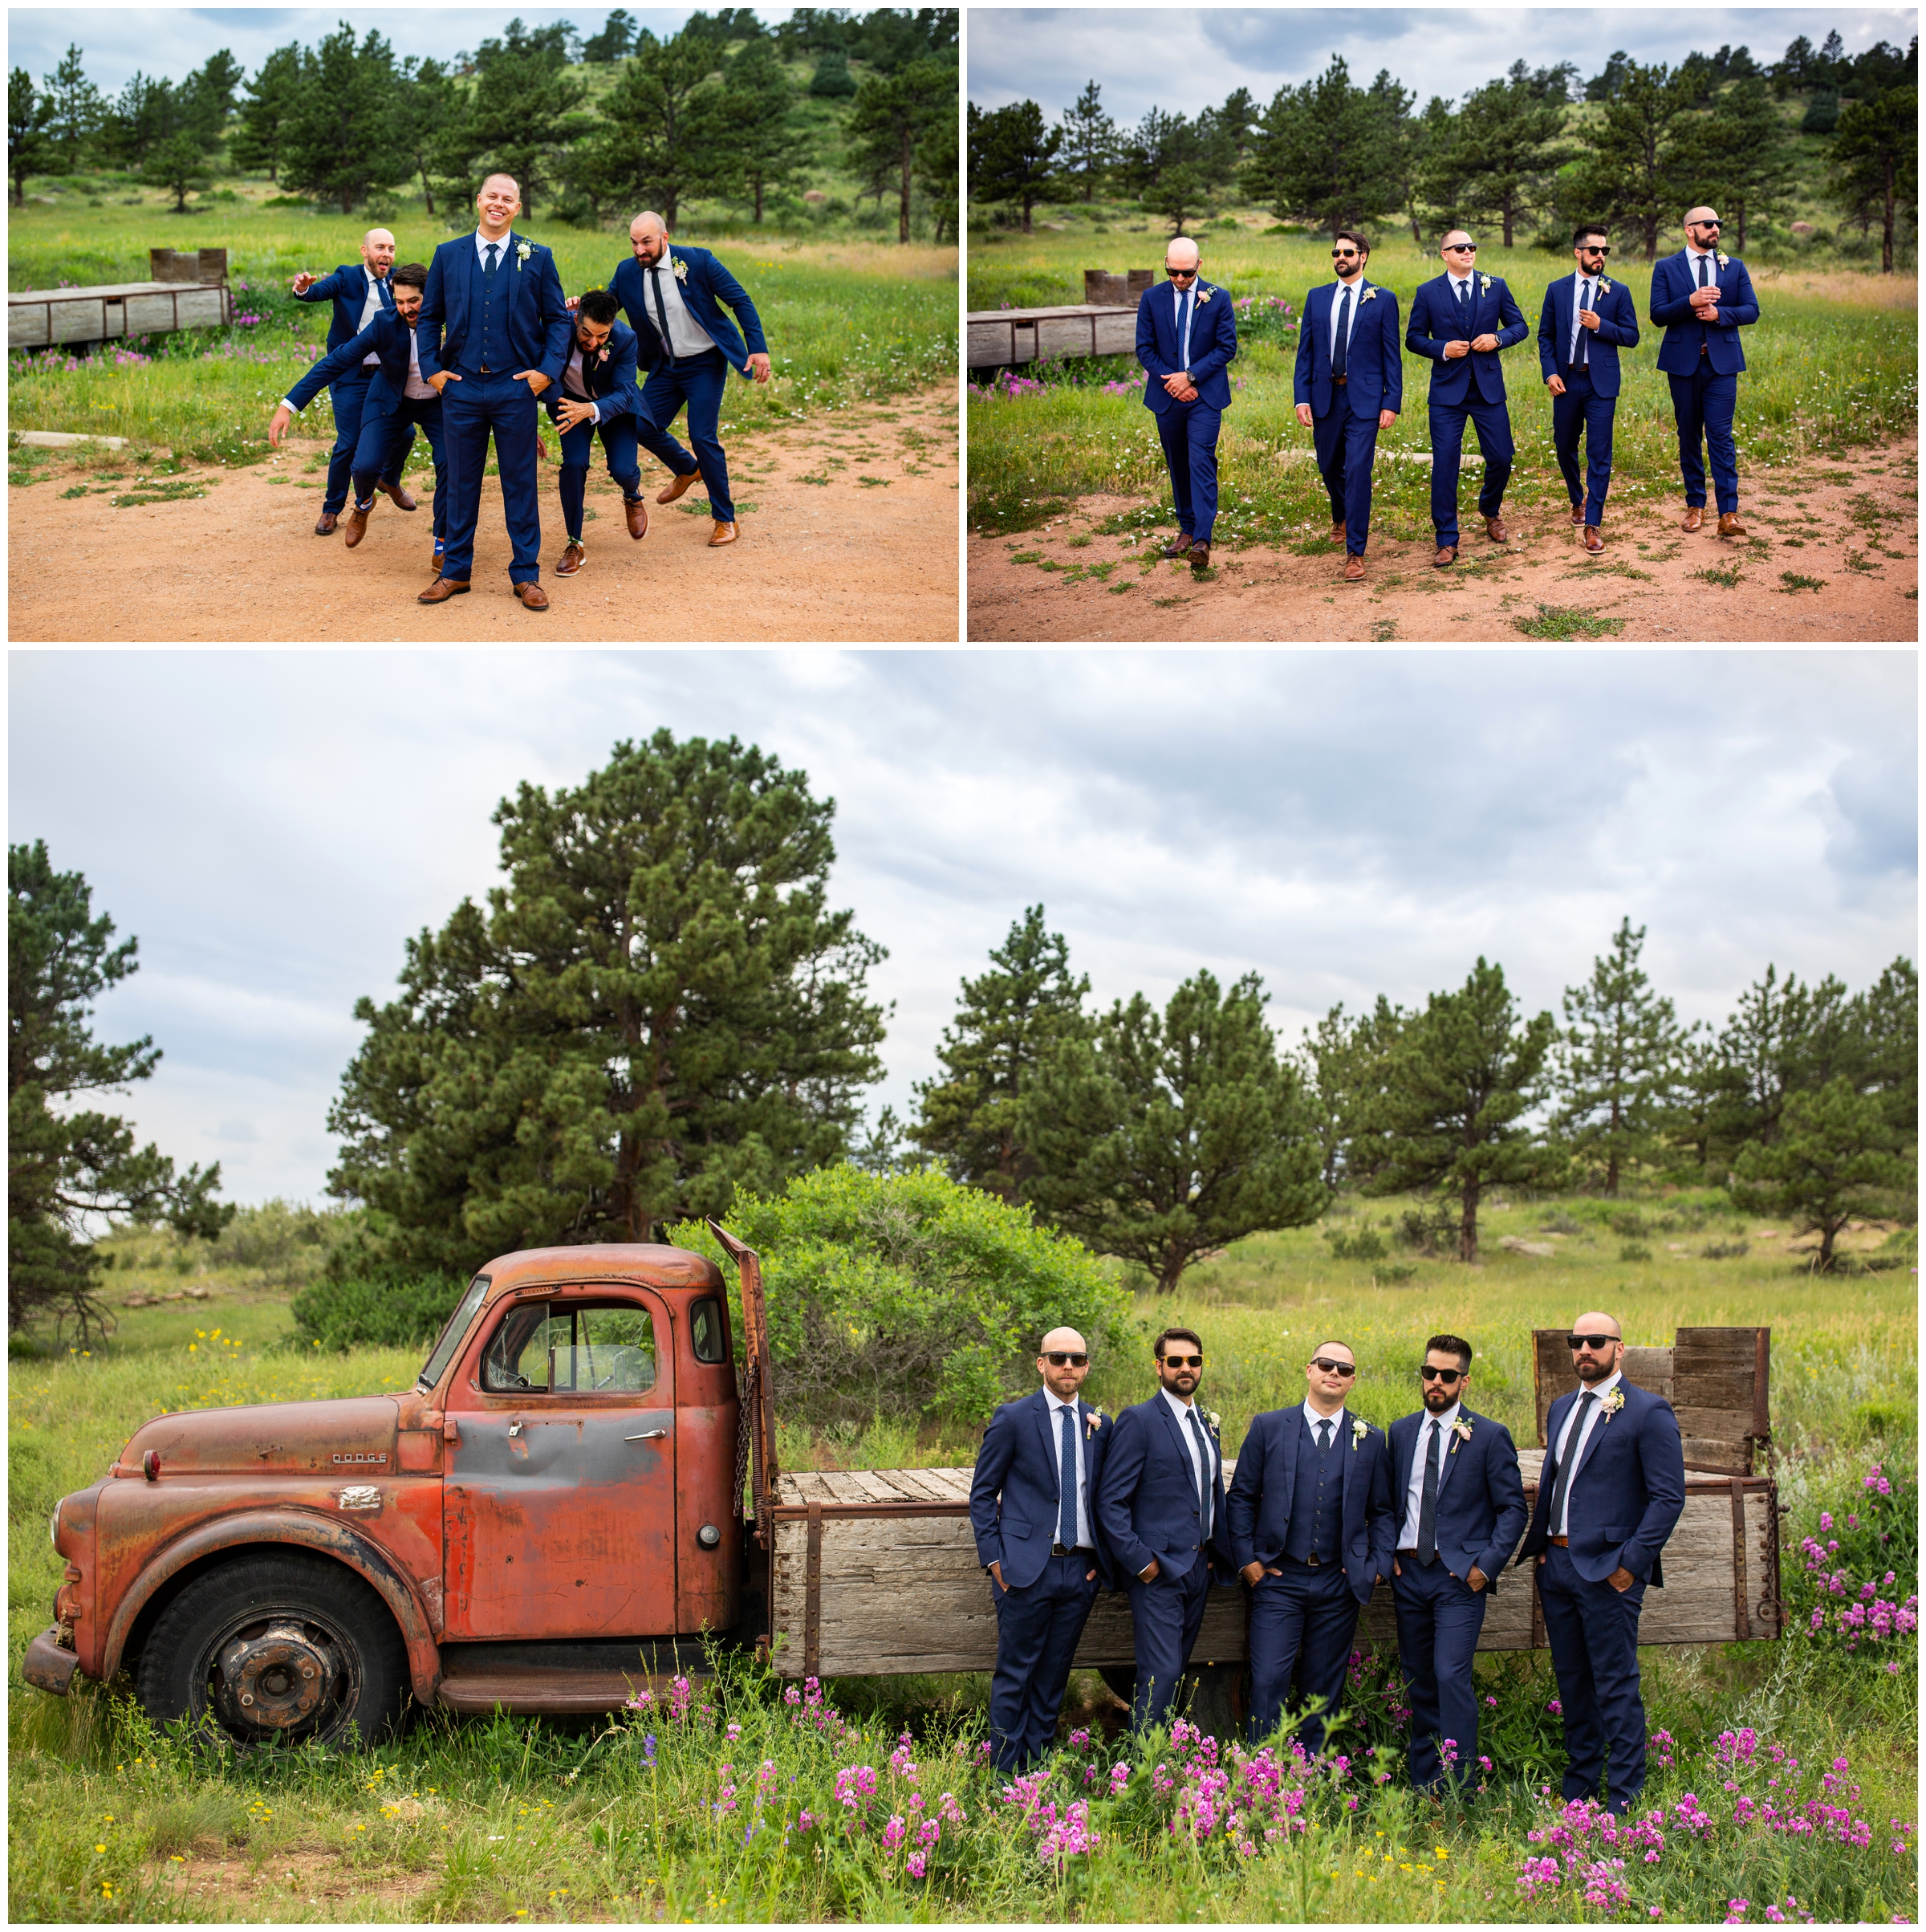 Groom and groomsmen photos in front of old vintage truck at Lionscrest manor summer wedding